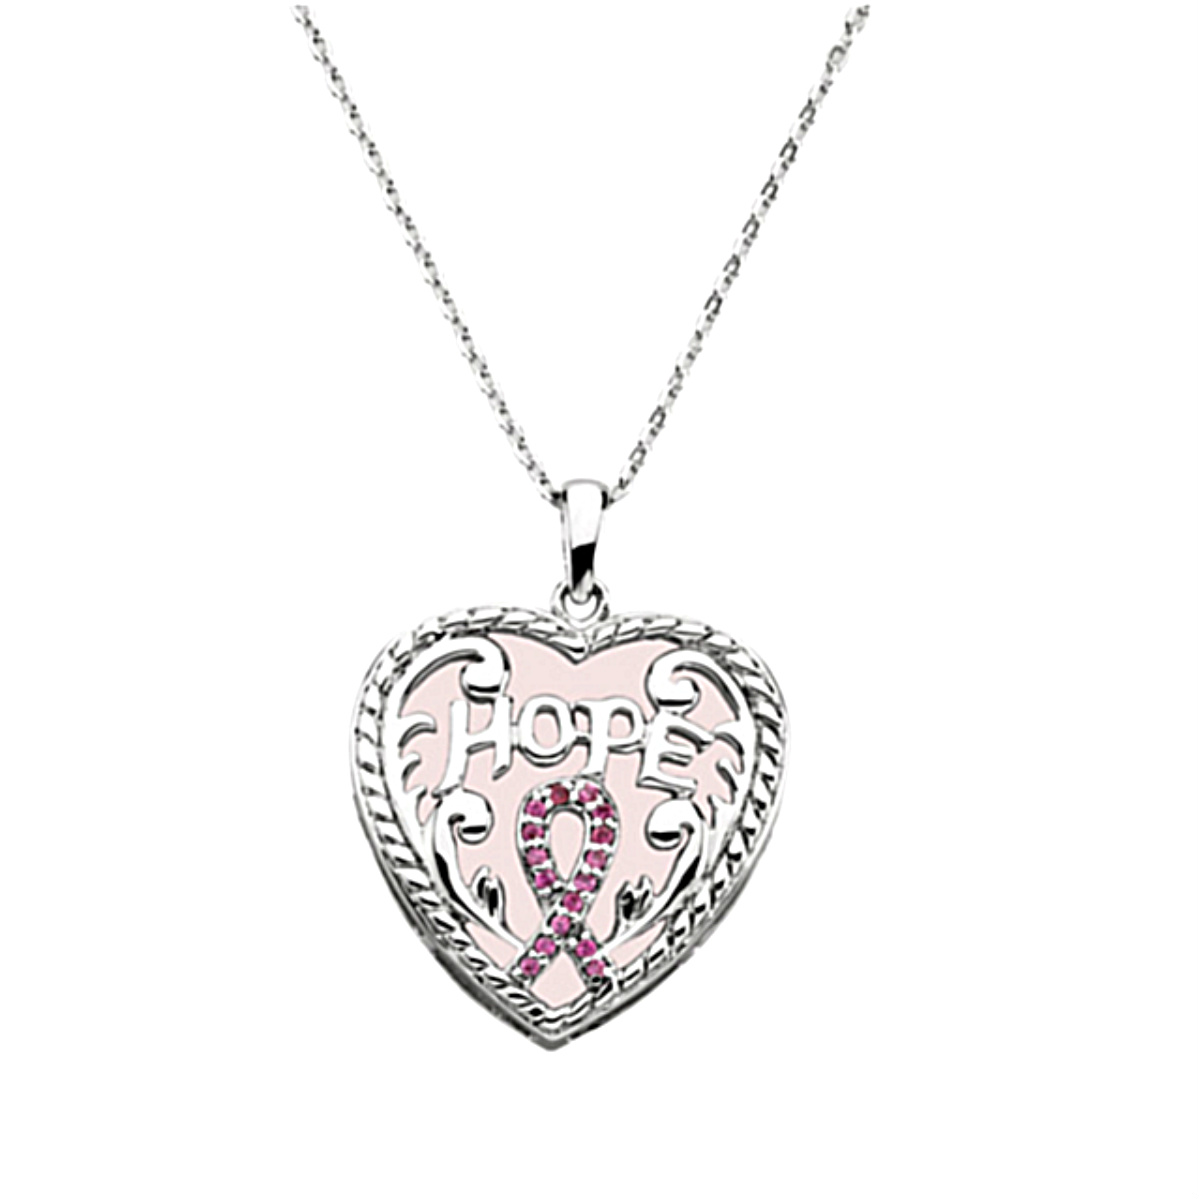 Pink Cubic Zirconia and Rose Quartz 'Breast Cancer Awareness' Hope Pendant Rhodium Plate Sterling Silver Necklace.